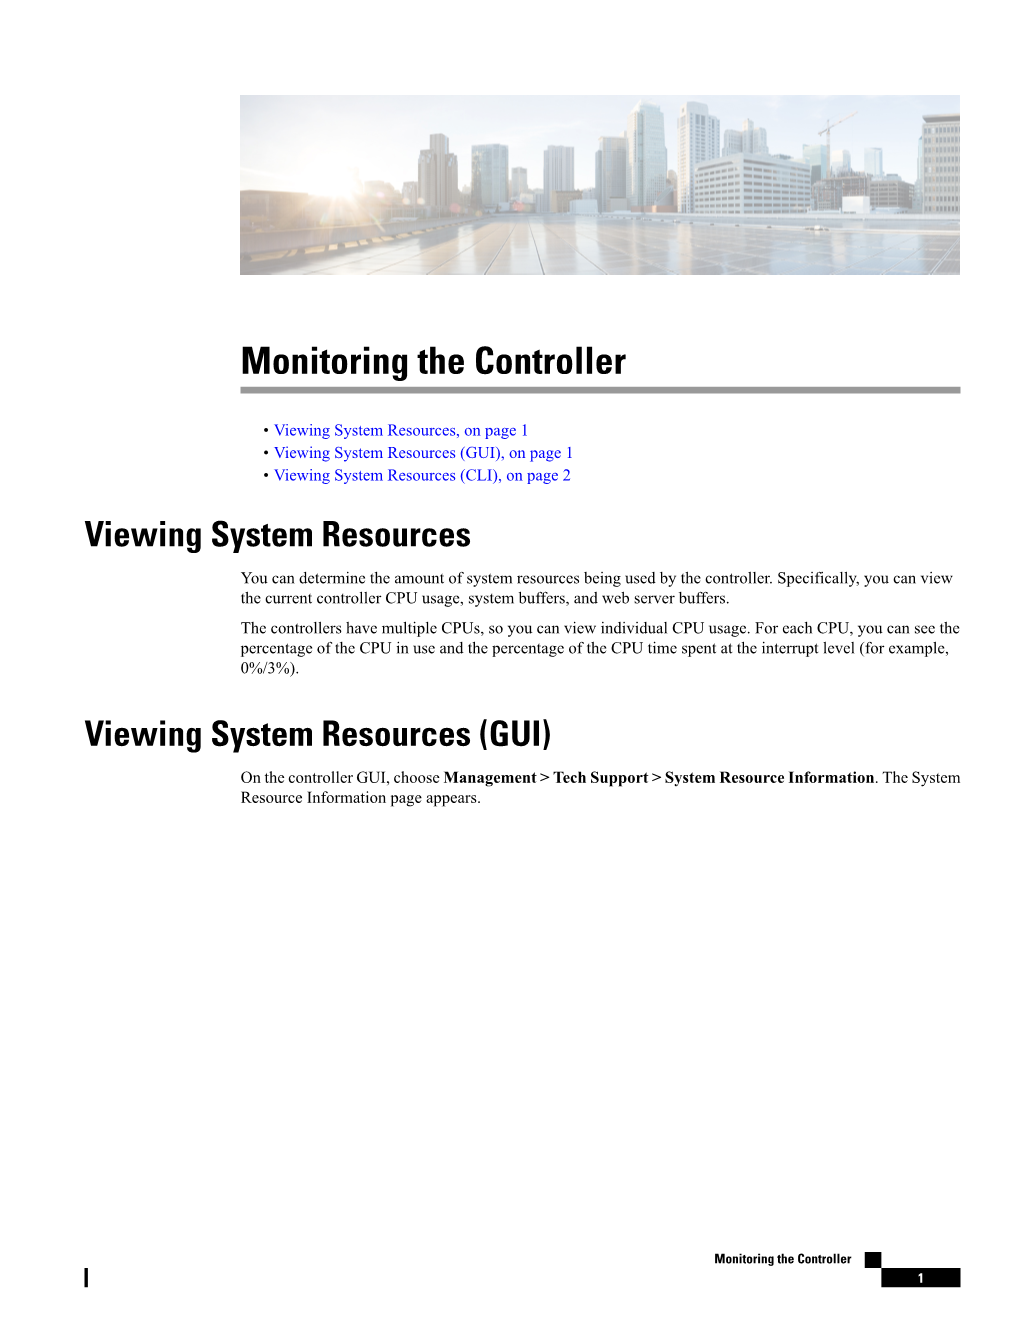 Monitoring the Controller